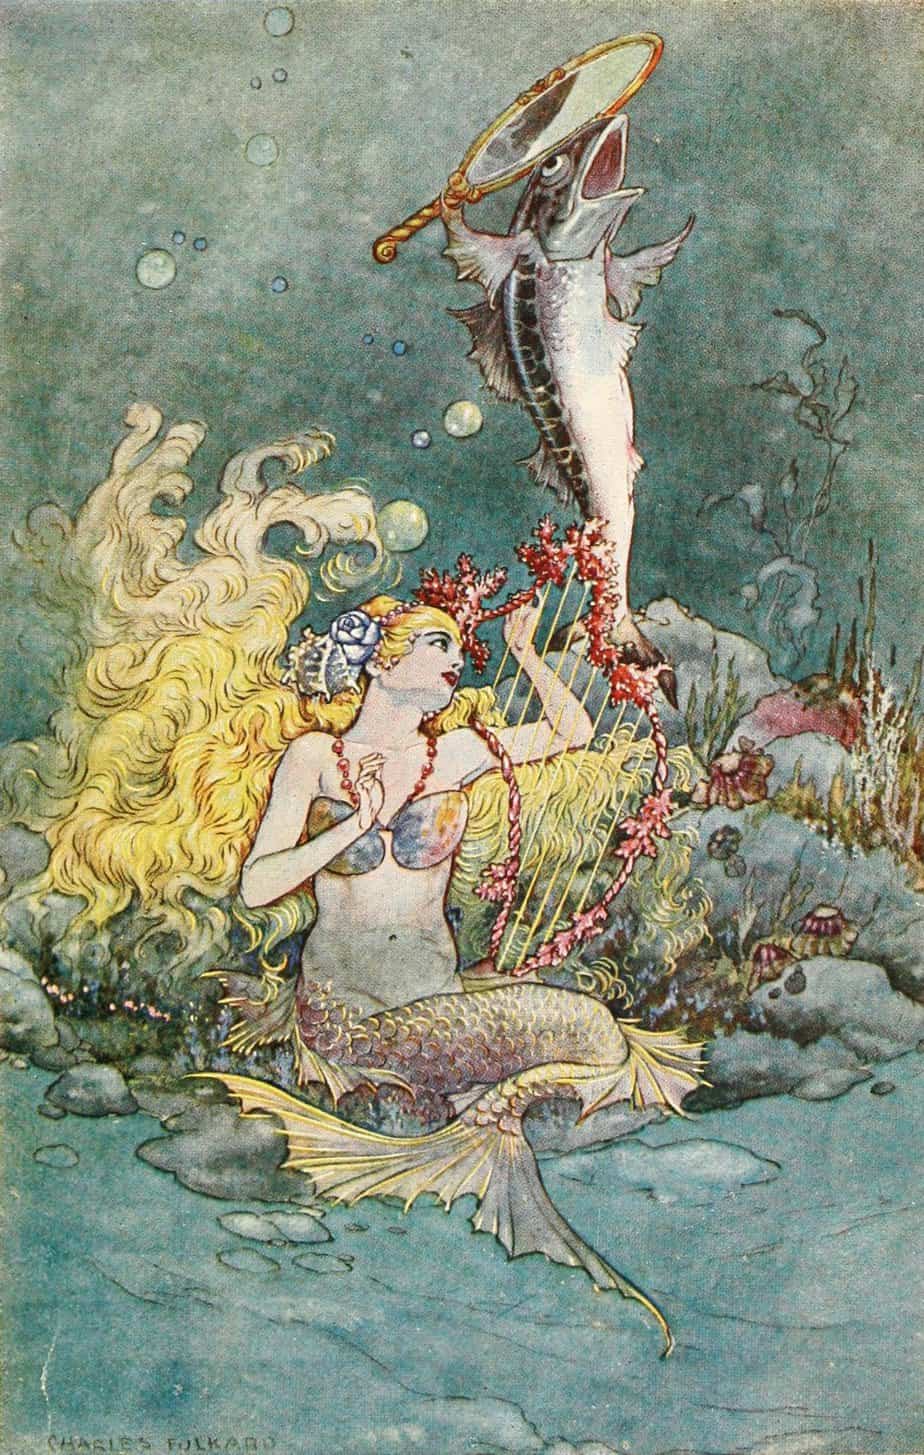 The Magic Mackerel Illustration By Charles Folkard 1920 from British fairy and folk tales edited by W.J. Glover 1920 fish